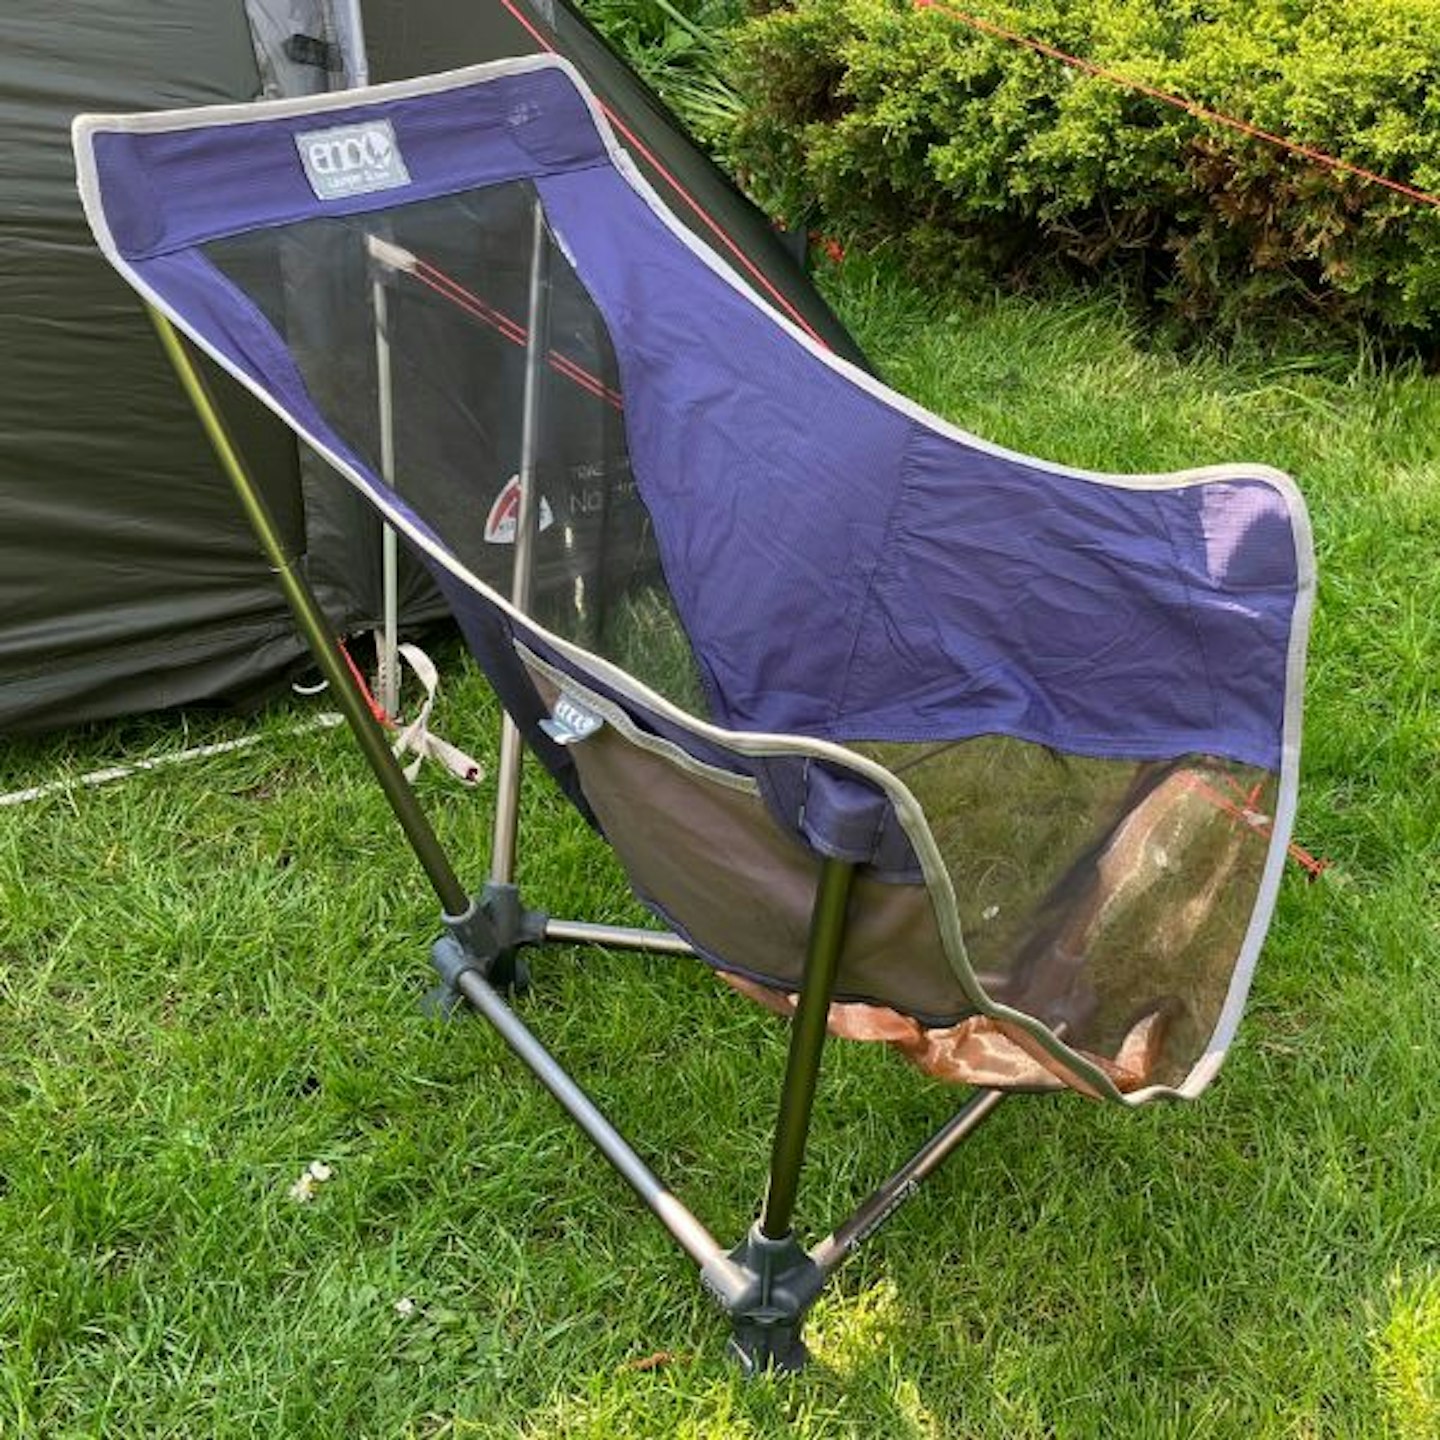 ENO Lounger SL Chair next to a tent